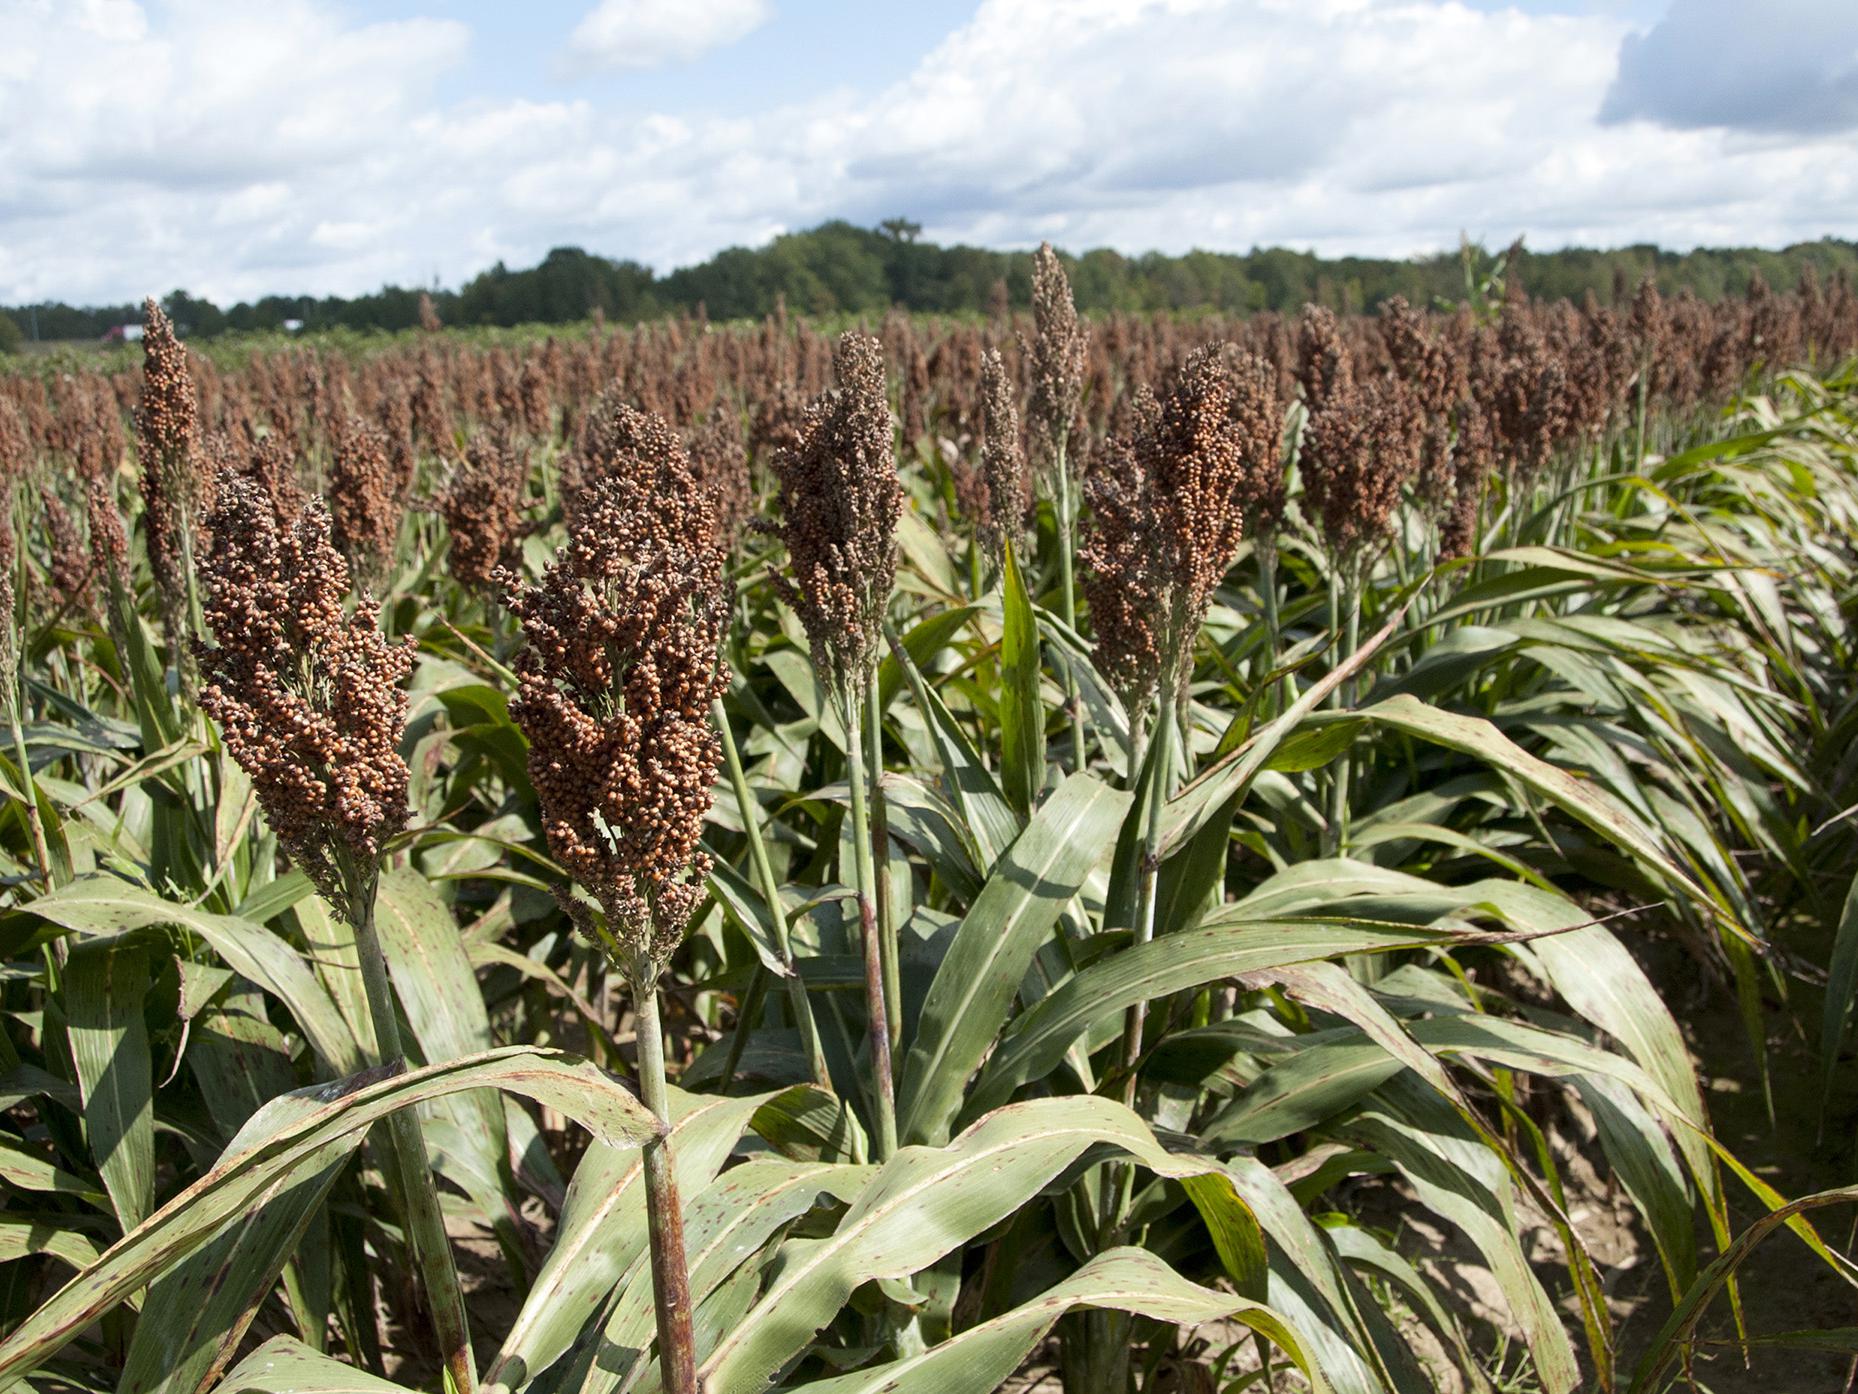 Mississippi's grain sorghum yields are projected to be 77 bushels per acre, an increase of 3 bushels per acre compared to 2011. (Photo by MSU Ag Communications/Kat Lawrence)